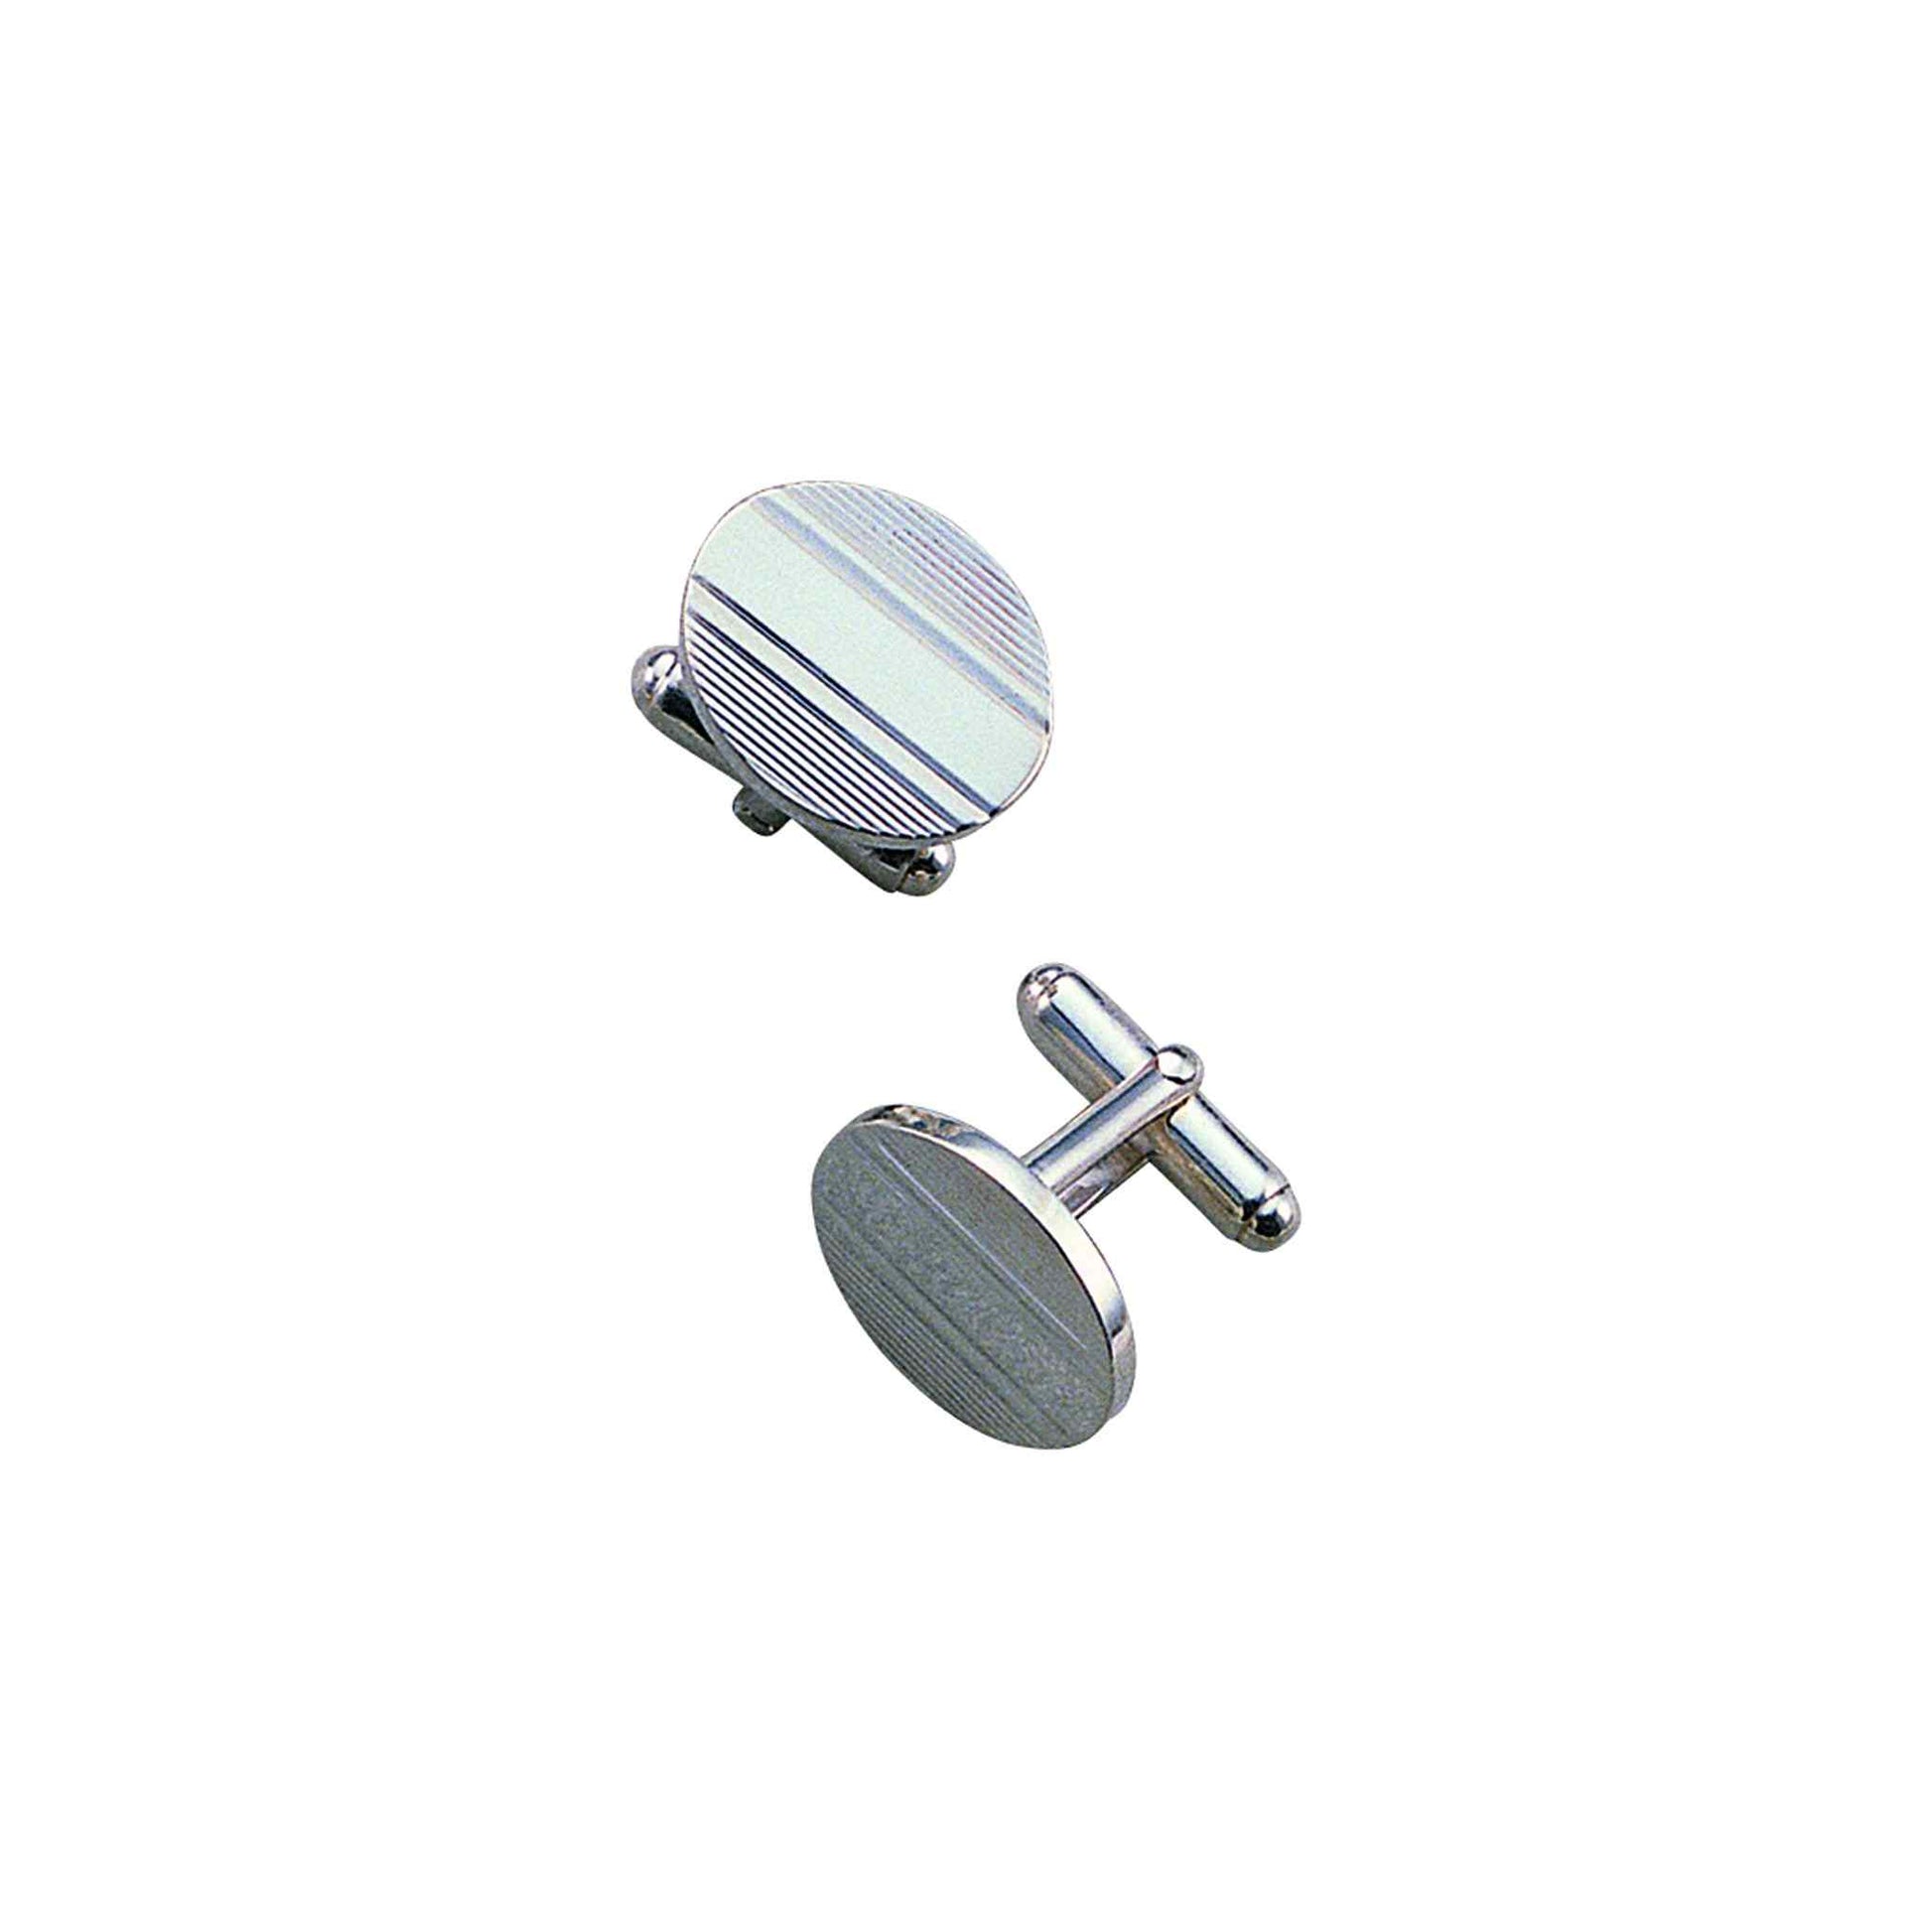 A sterling silver oval cufflinks with engine-turned lines displayed on a neutral white background.